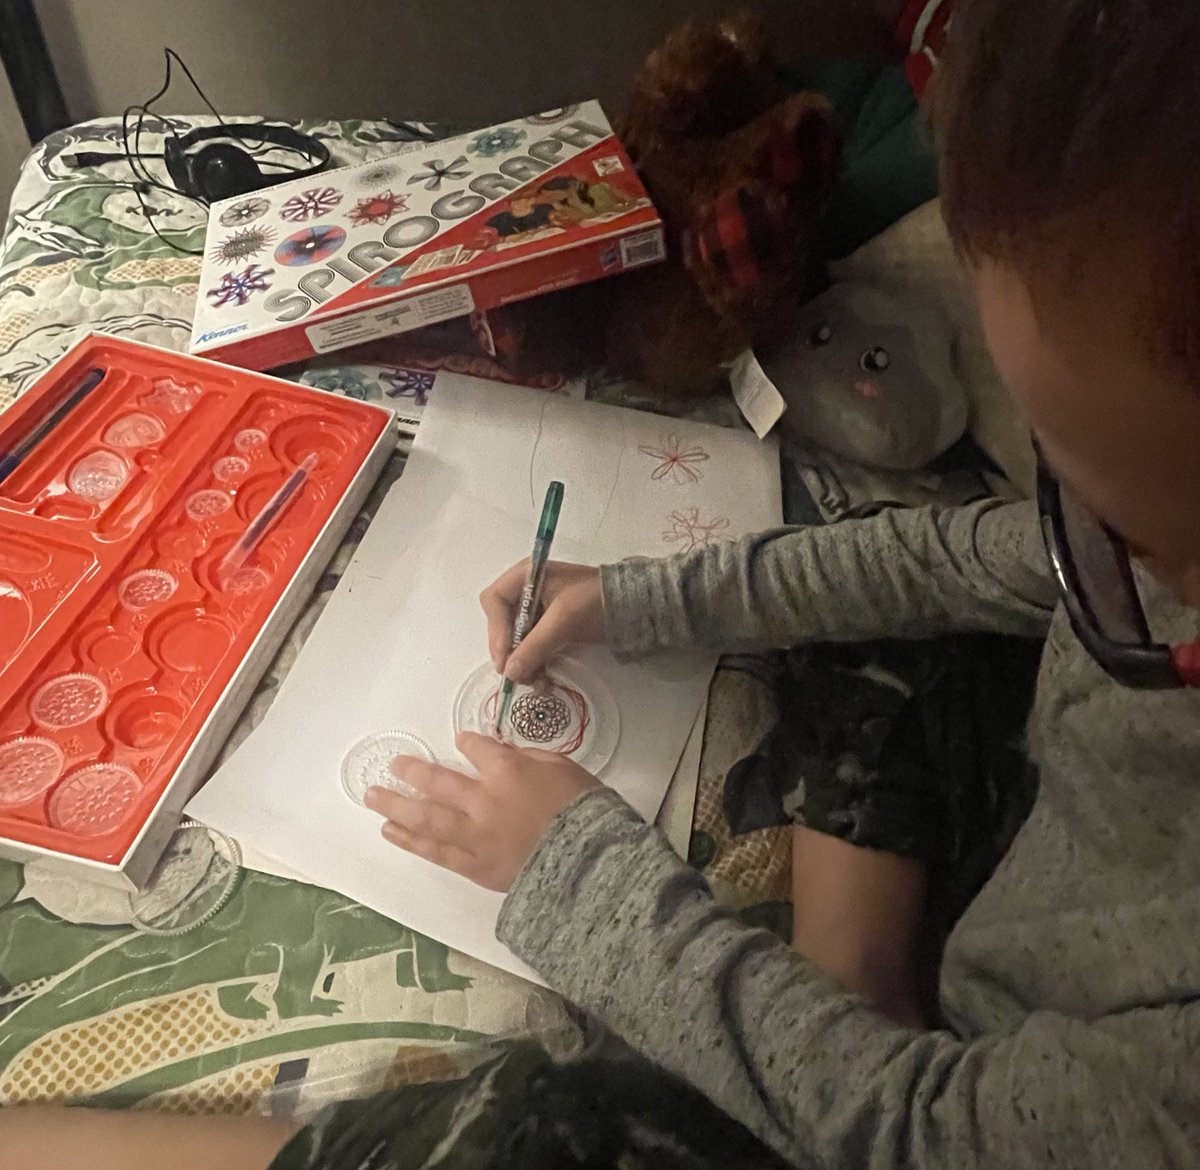 I went in to read his nightly book and tuck him in and found him hard at work with the #Spirograph…kids need more toys like this and less video games. #imaginationatwork